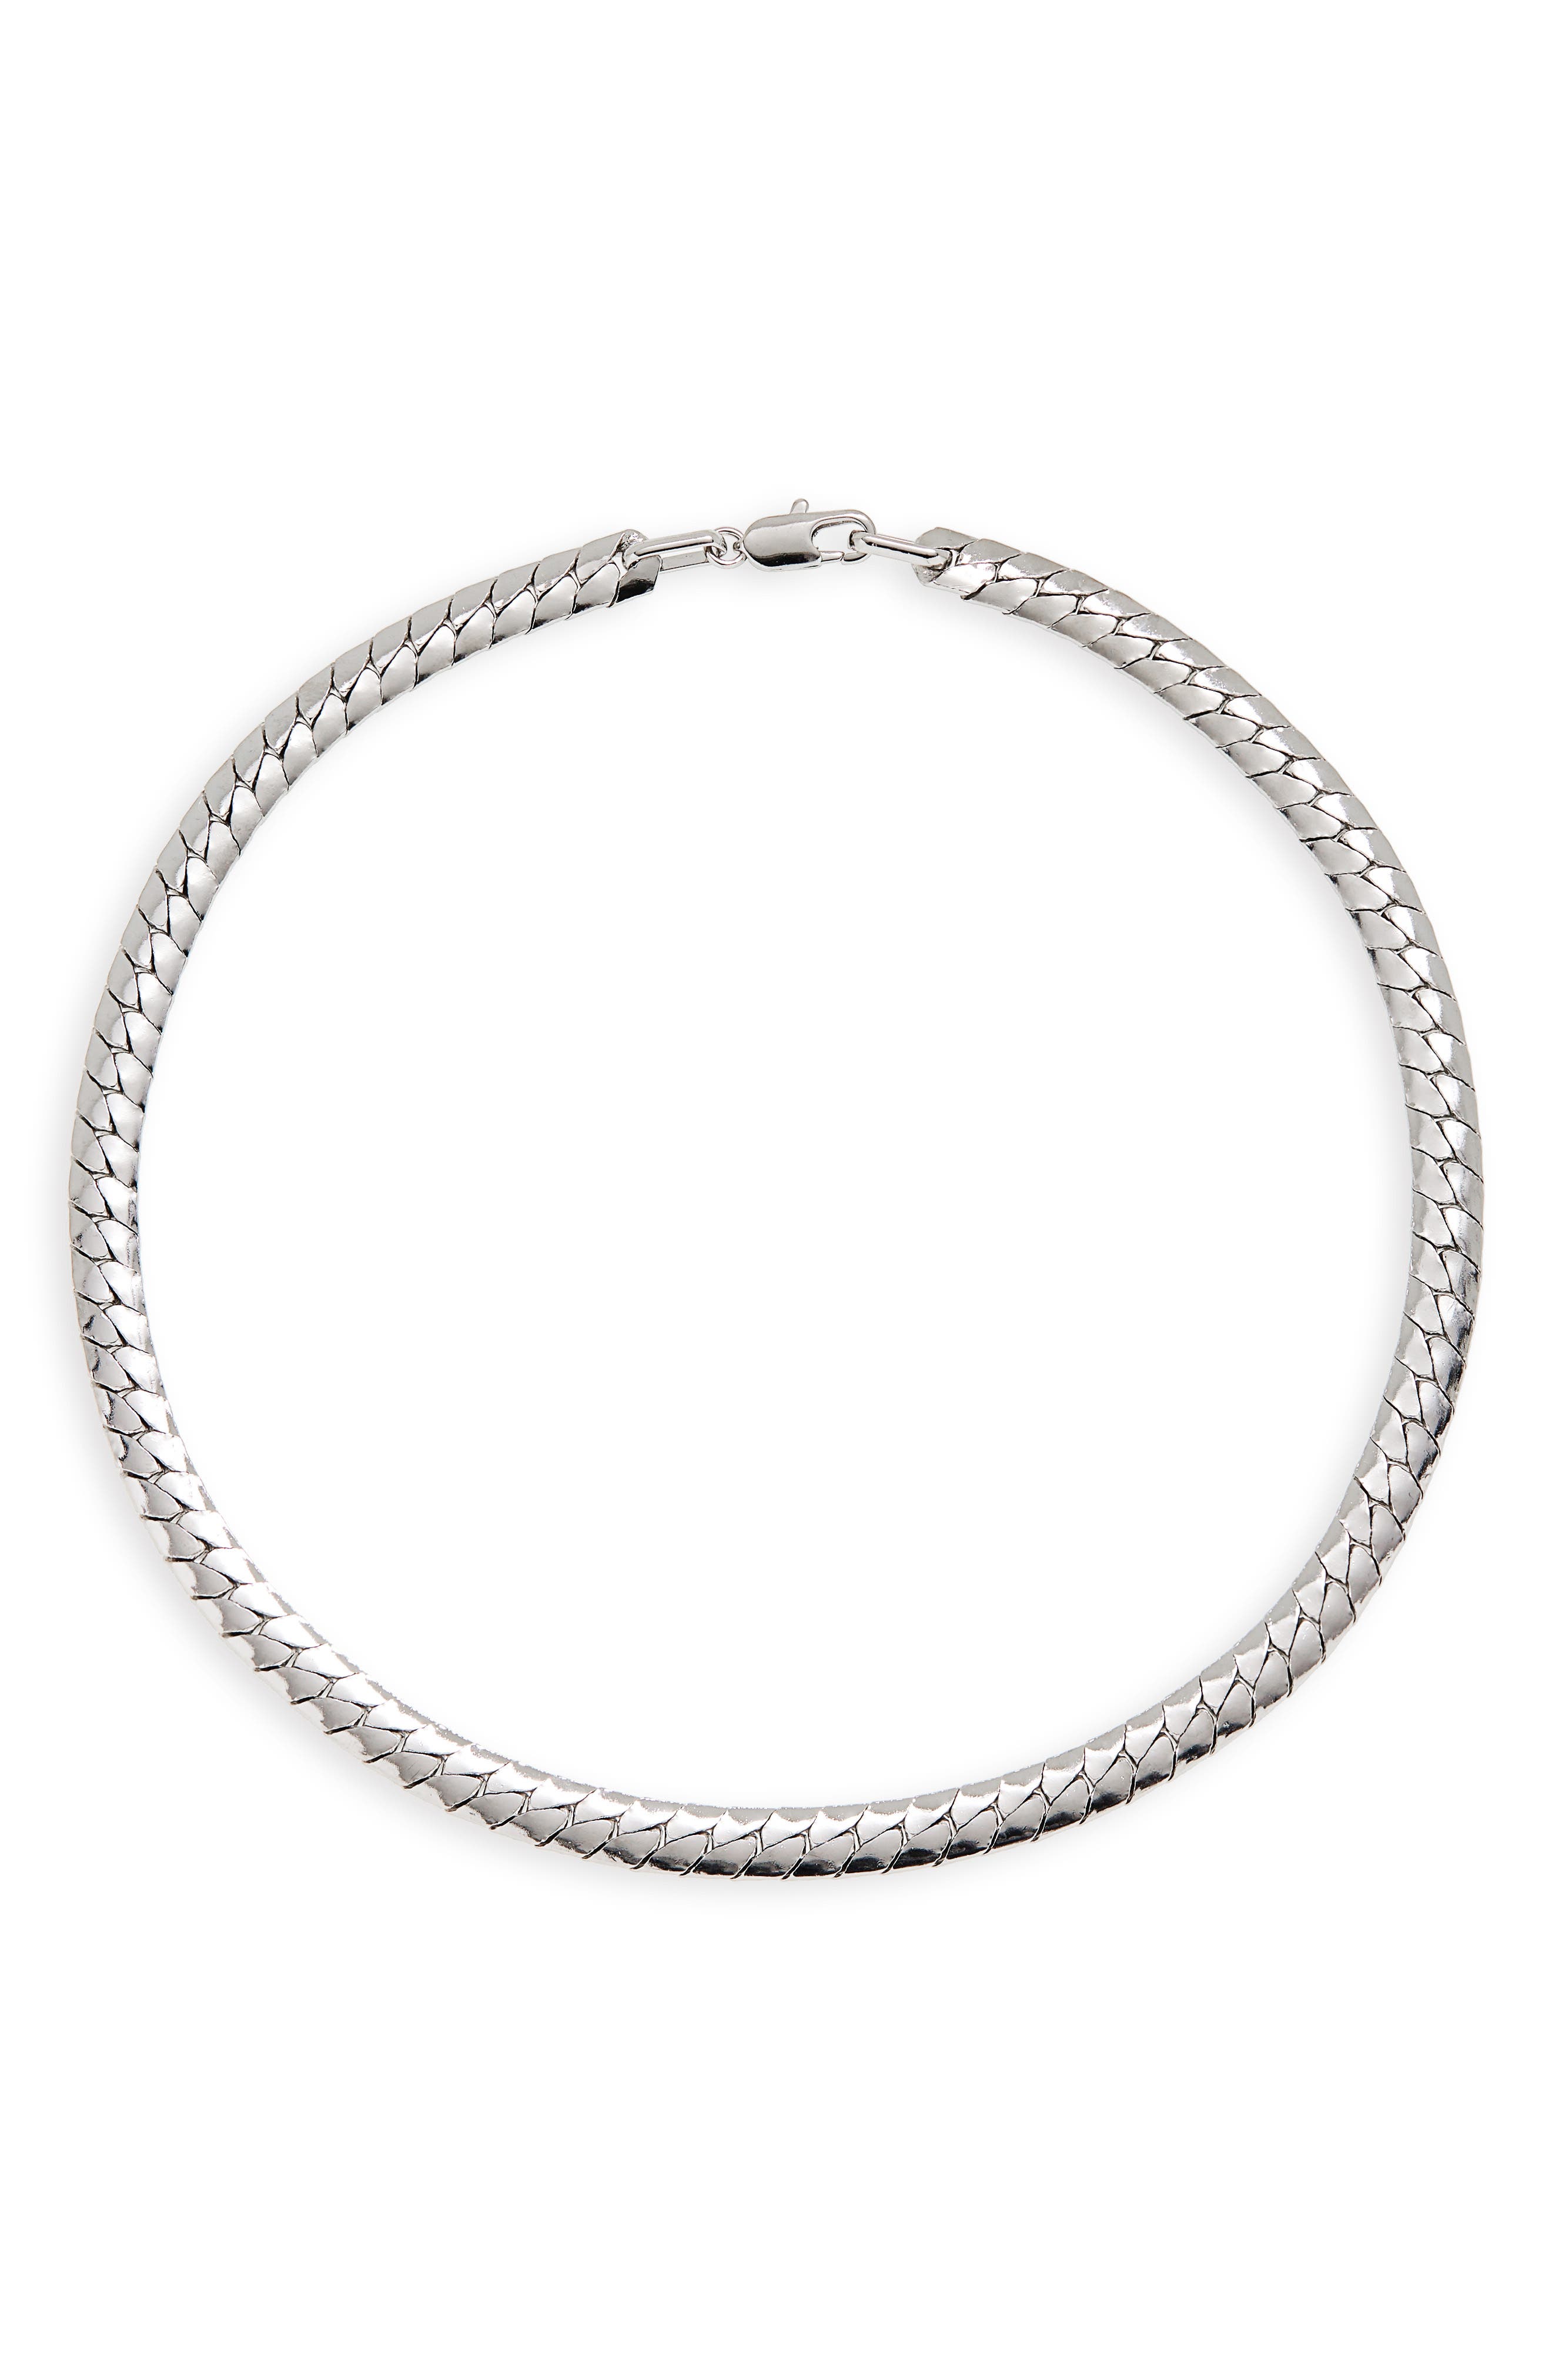 Laura Lombardi Piatta Chain Necklace in Platinum Plated Vintage Brass at Nordstrom, Size 18 In Us